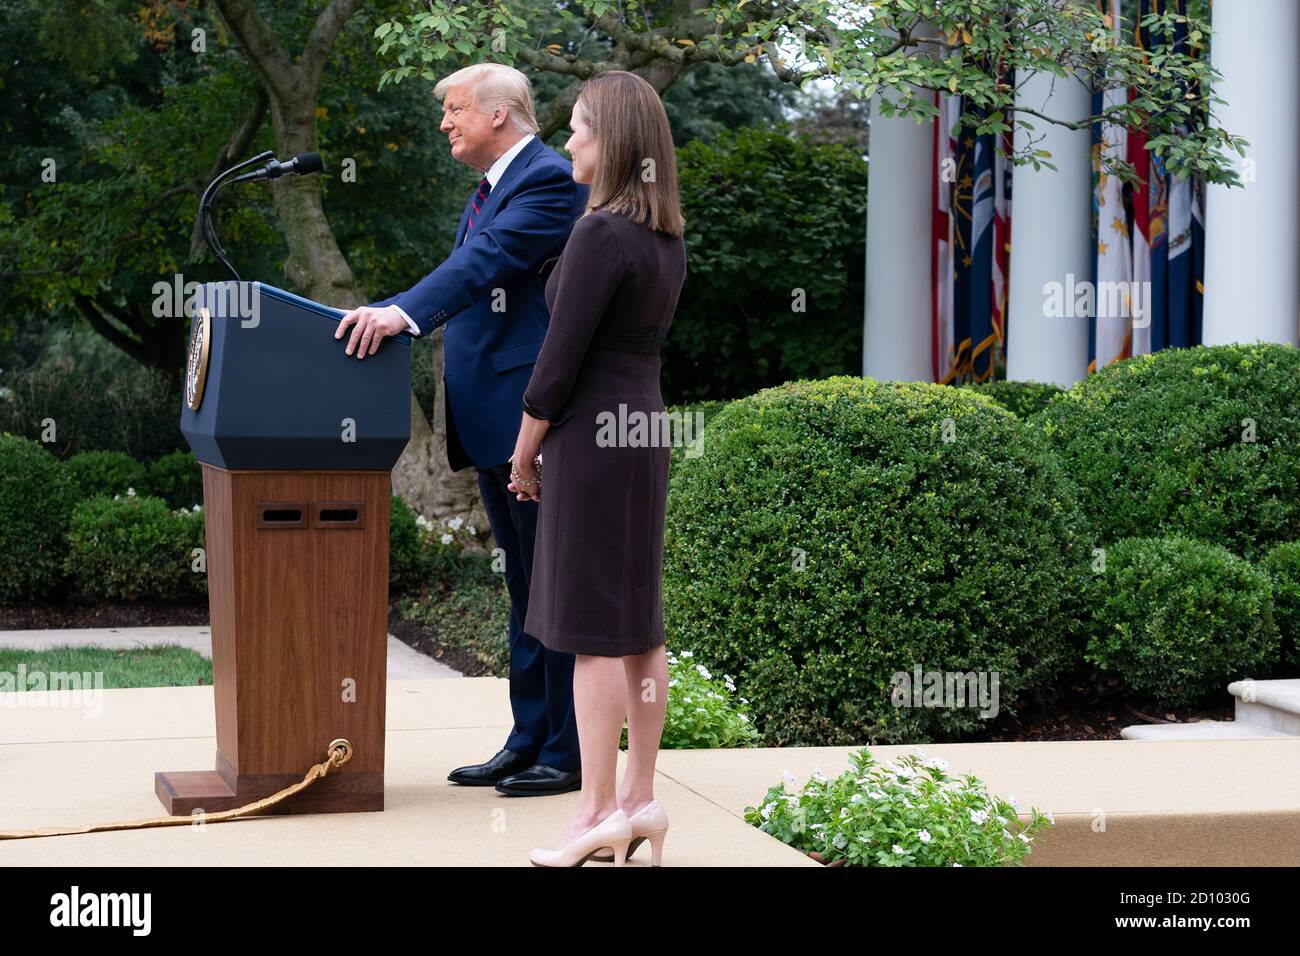 President Trump Nominates Judge Amy Coney Barrett for Associate Justice of the U.S. Supreme Court. This is the event that some believe is a  super spreader gathering where the president acquired or  spread COVID 19 to multiple attendees. President Donald J. Trump listens as Judge Amy Coney Barrett, his nominee for Associate Justice of the Supreme Court of the United States, addresses her remarks Saturday, September 26, 2020, in the Rose Garden of the White House. Stock Photo